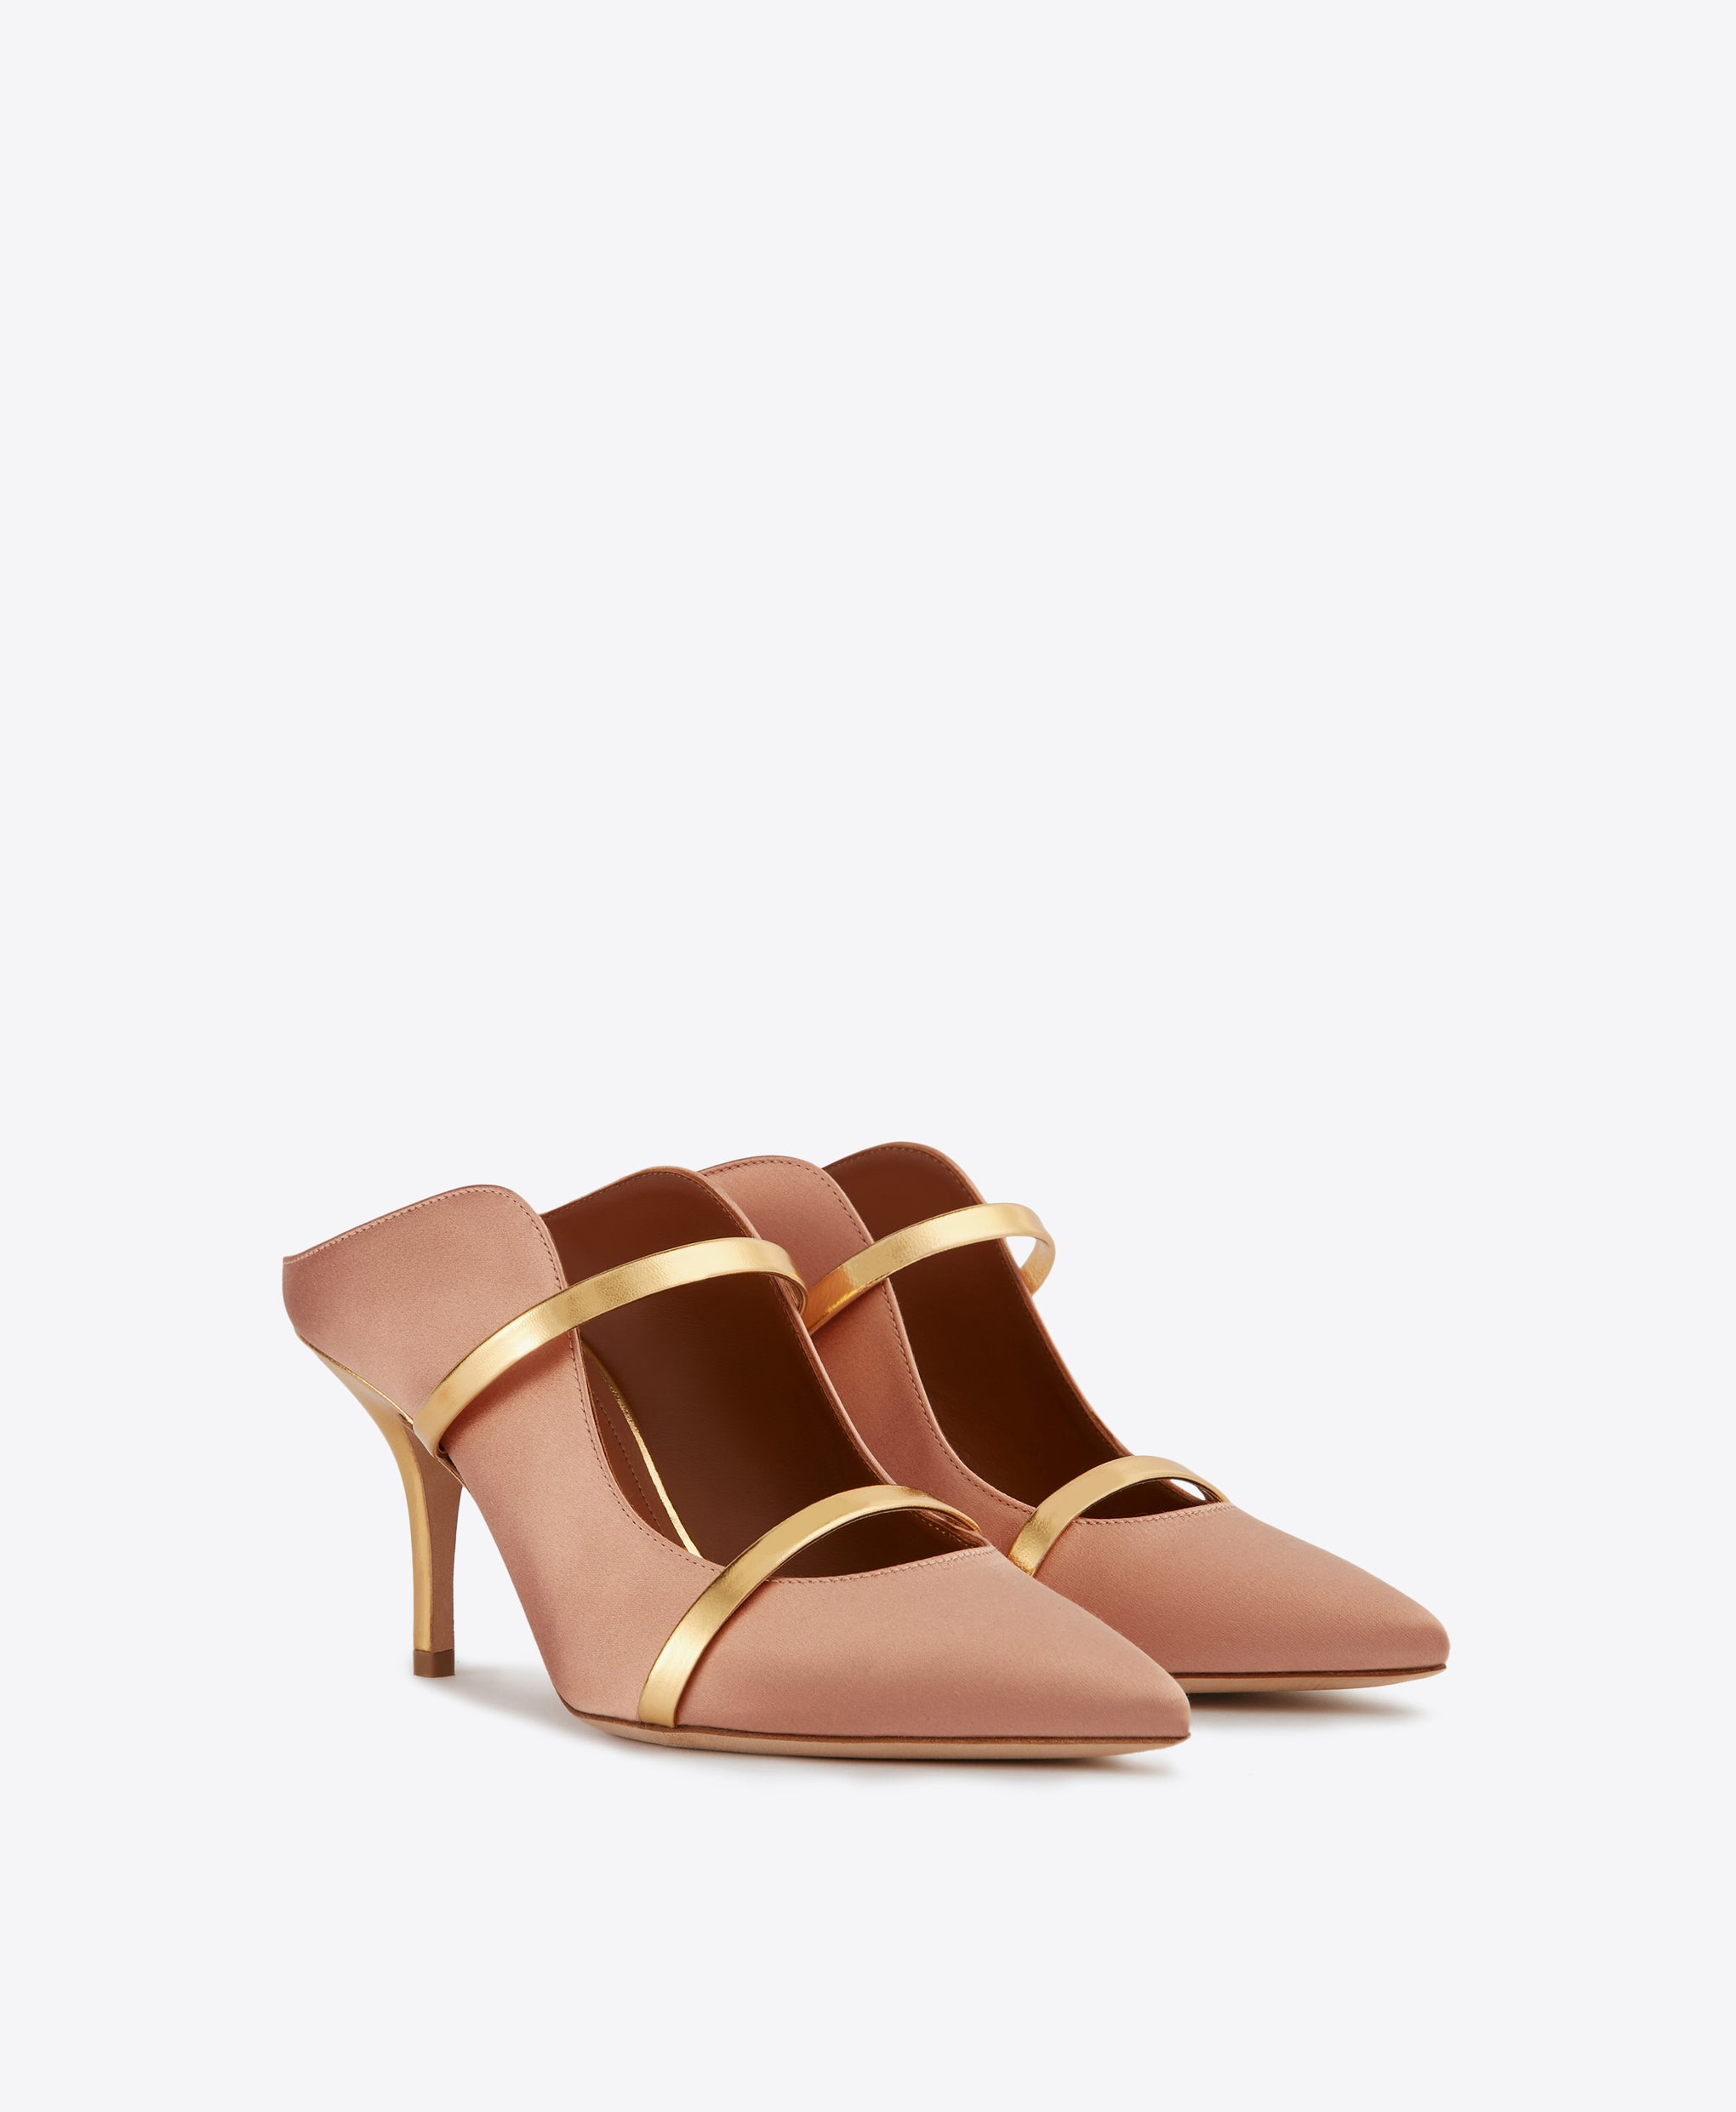 Malone Souliers Satin Blush Pink Heeled Mules with Signature Gold Leather Straps